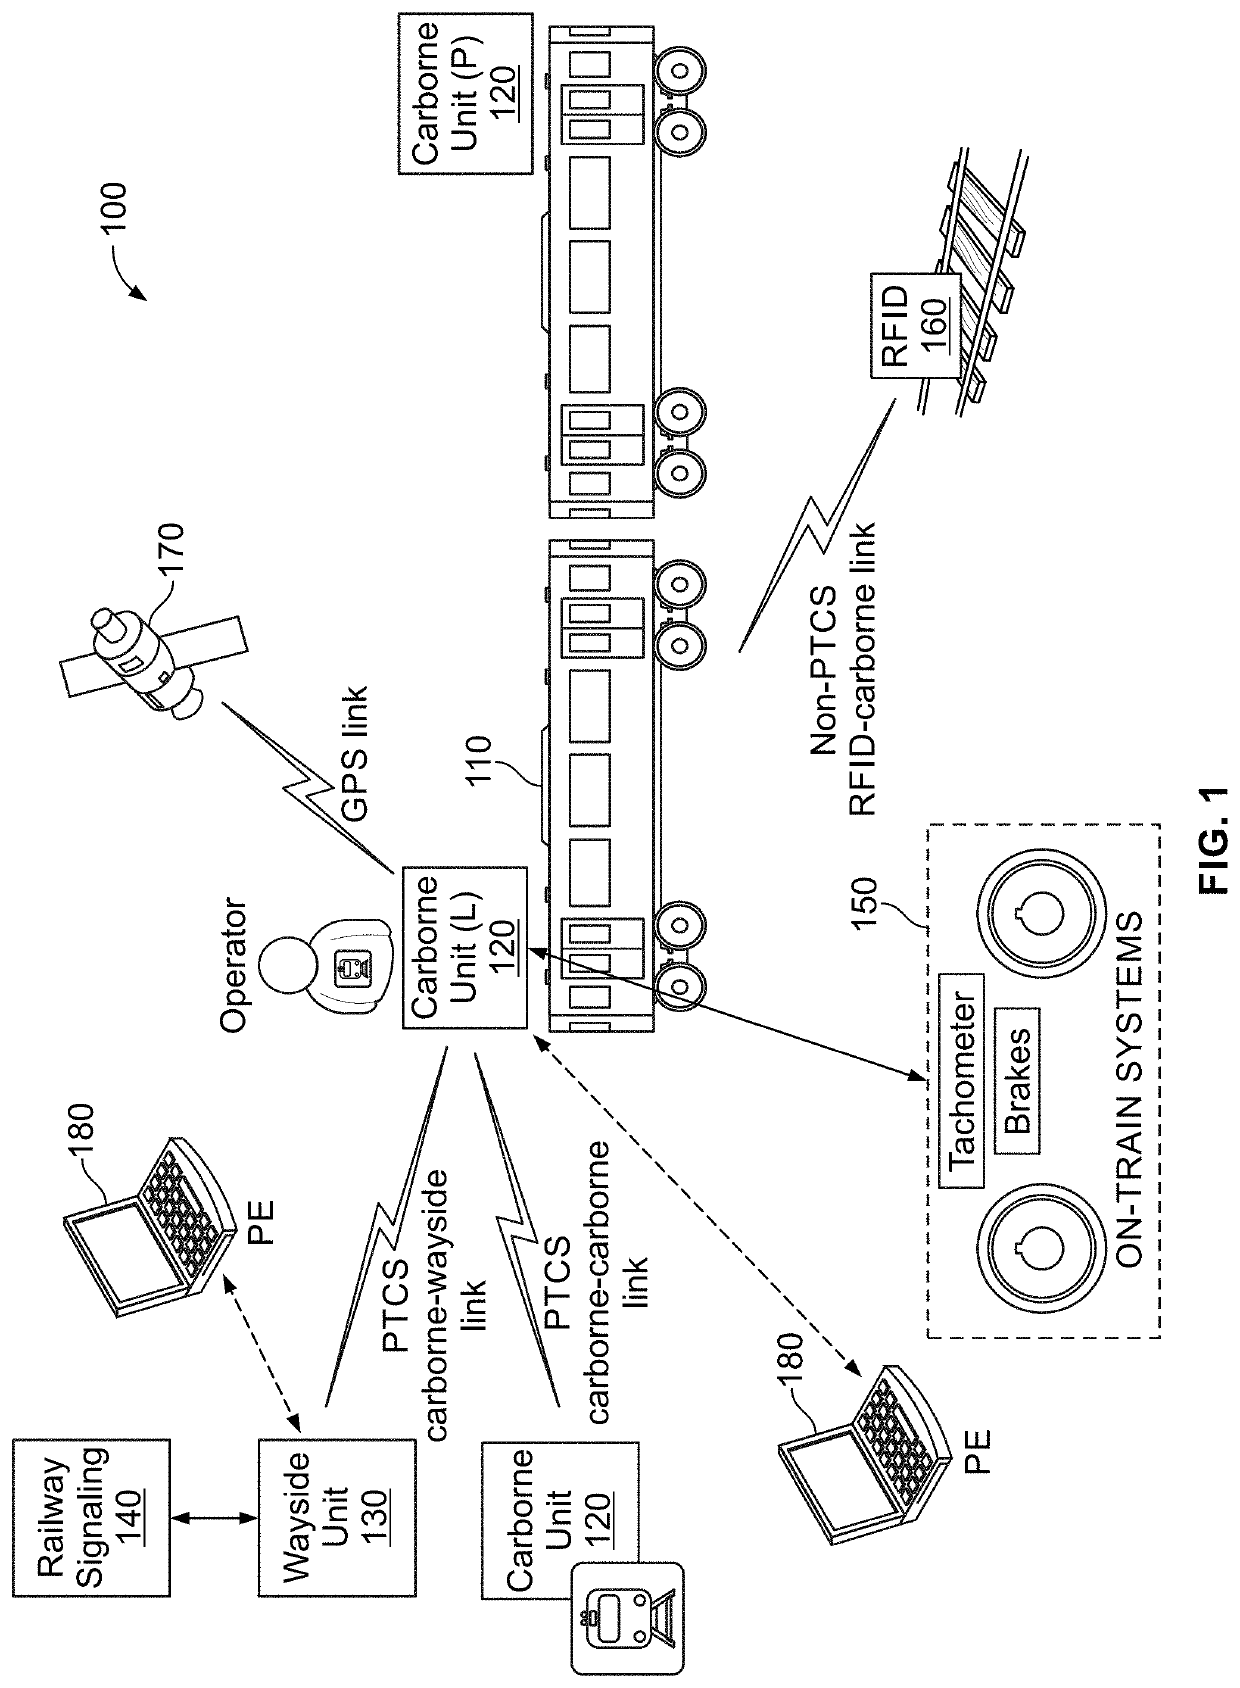 Methods and systems for decentralized rail signaling and positive train control